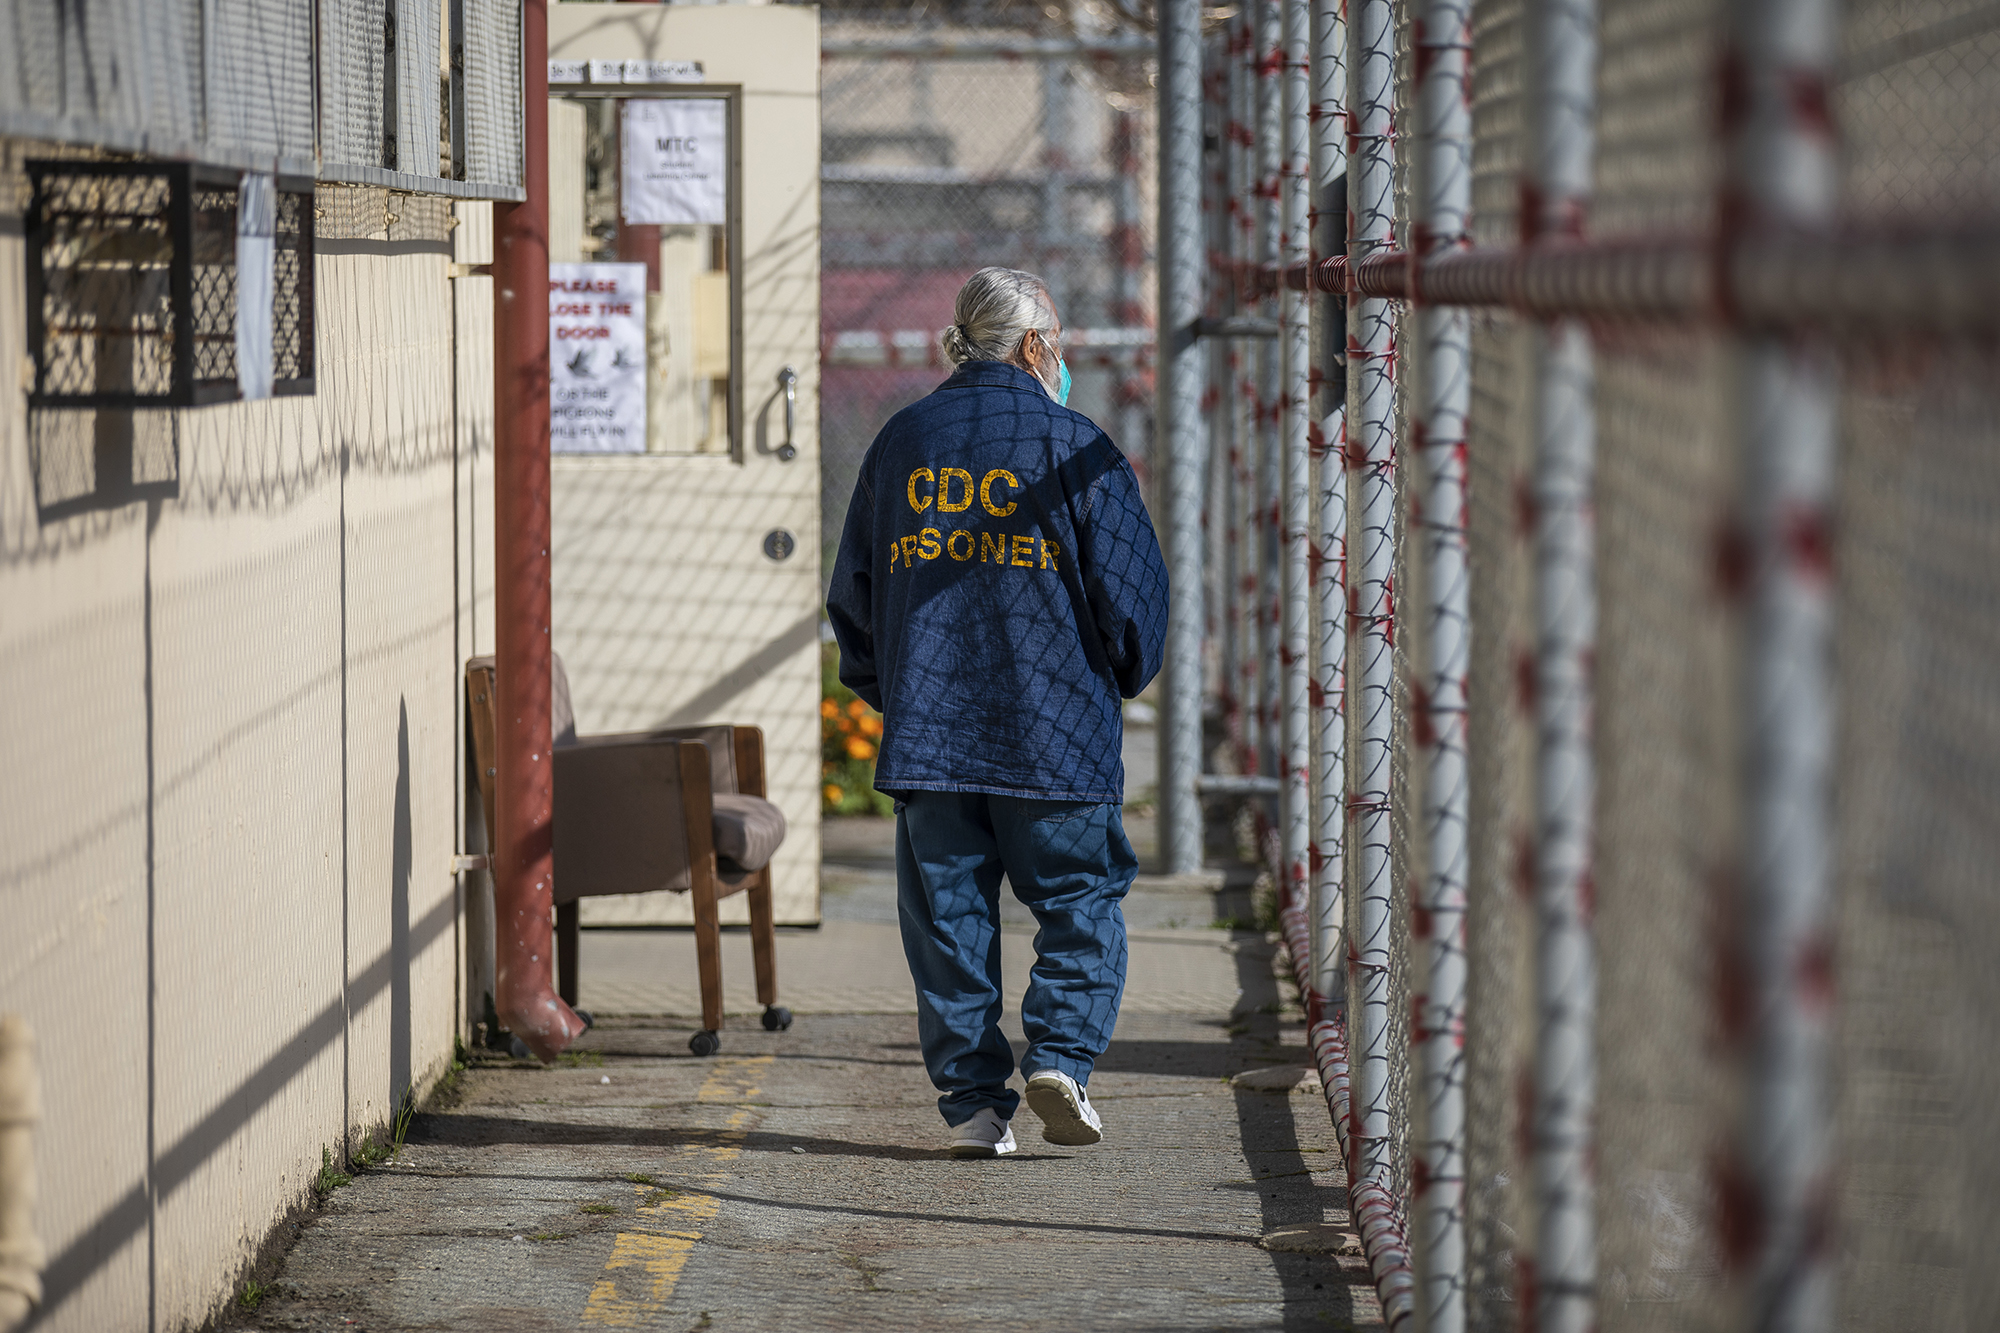 Man with gray pony tail wearing blue pants and a blue shirt with the words CDC Prisoner on it walks next to a chain link fence